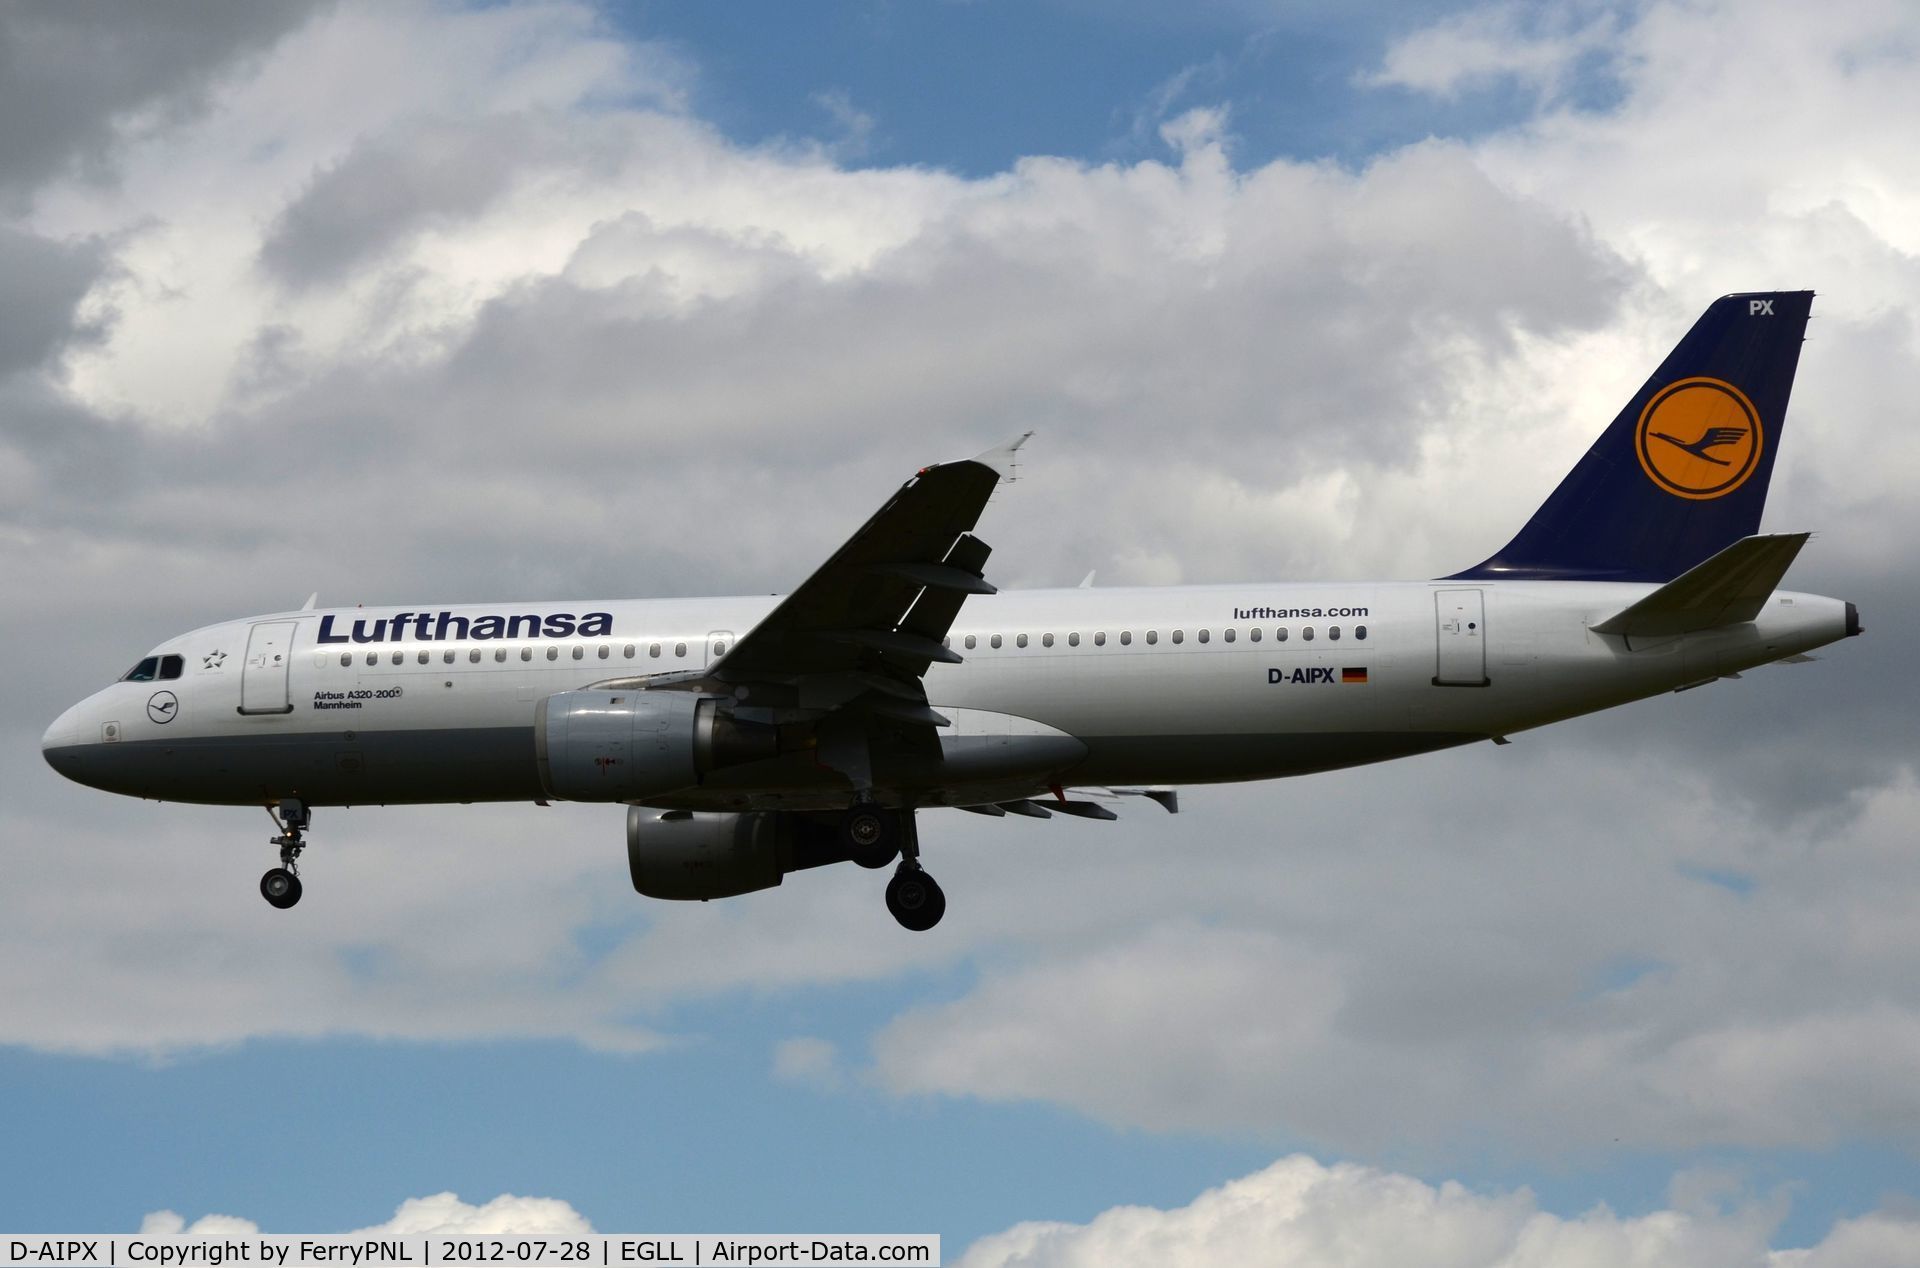 D-AIPX, 1990 Airbus A320-211 C/N 147, LH A320. This plane crashed 24. Mar 2015 in France.